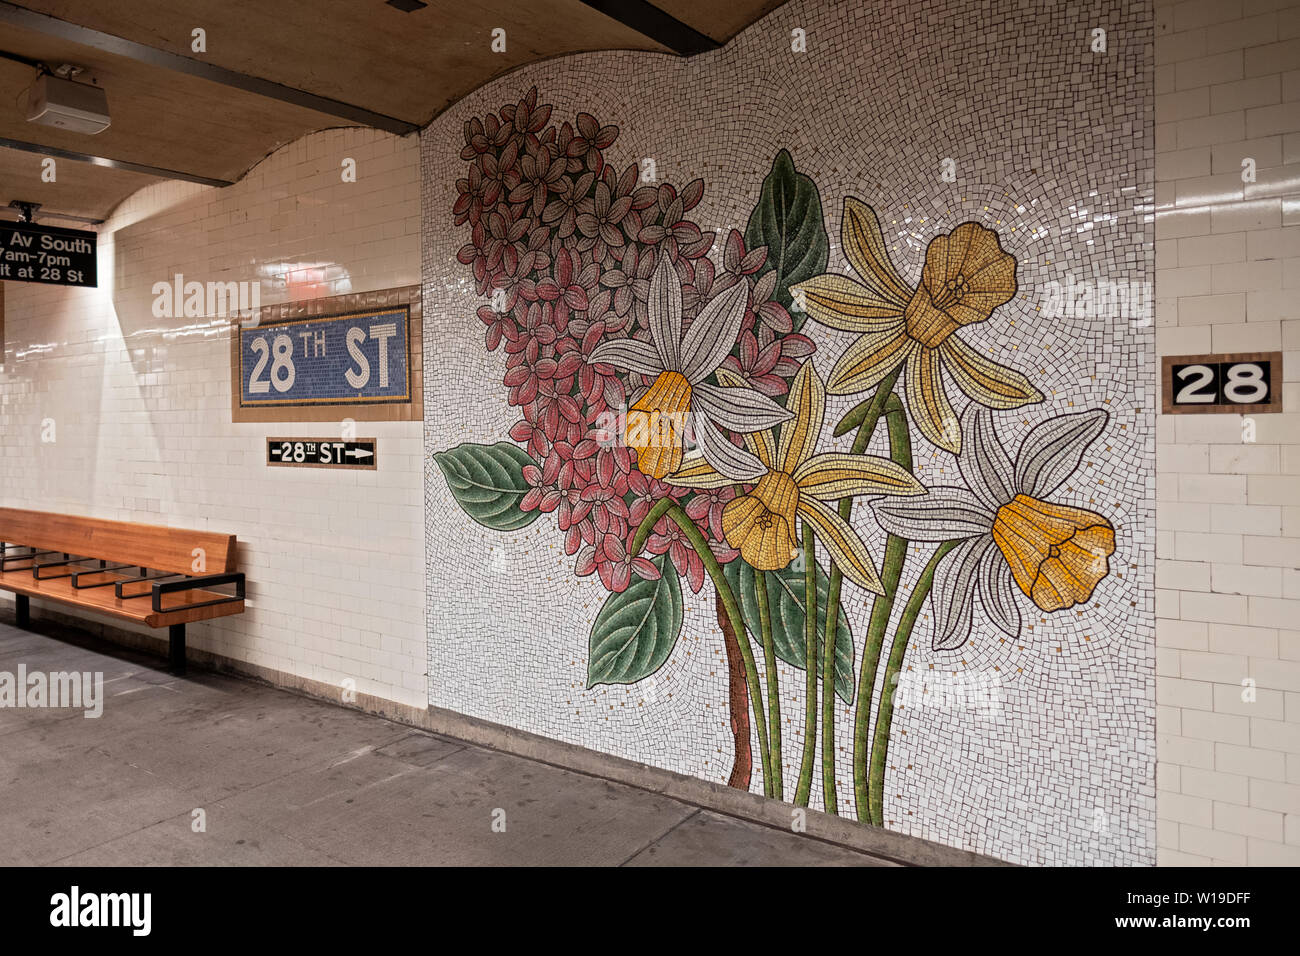 Beautiful floral mosaic mural at the East 28th Street subway station on the number 6 line in Manhattan, New York City. Stock Photo